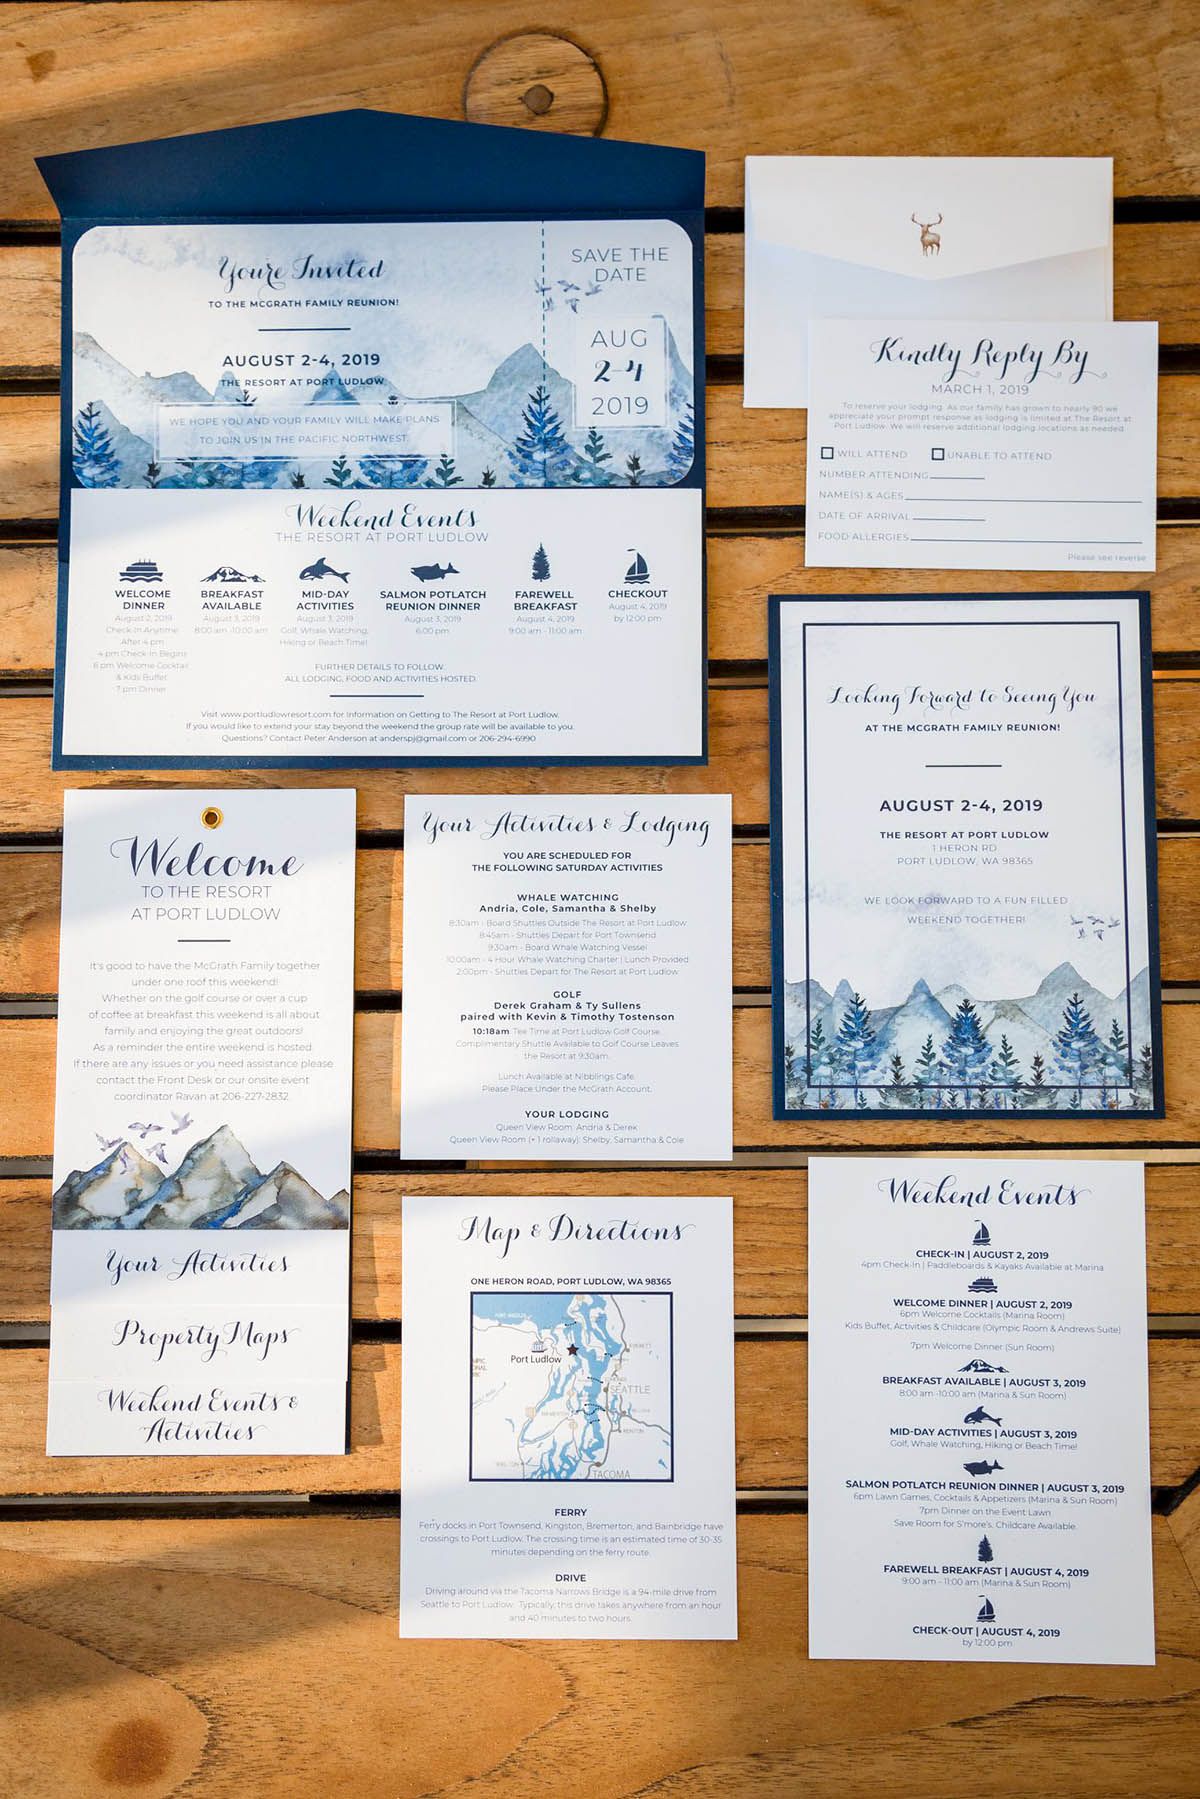 PNW family reunion invitations and programs - planned by Pink Blossom Events